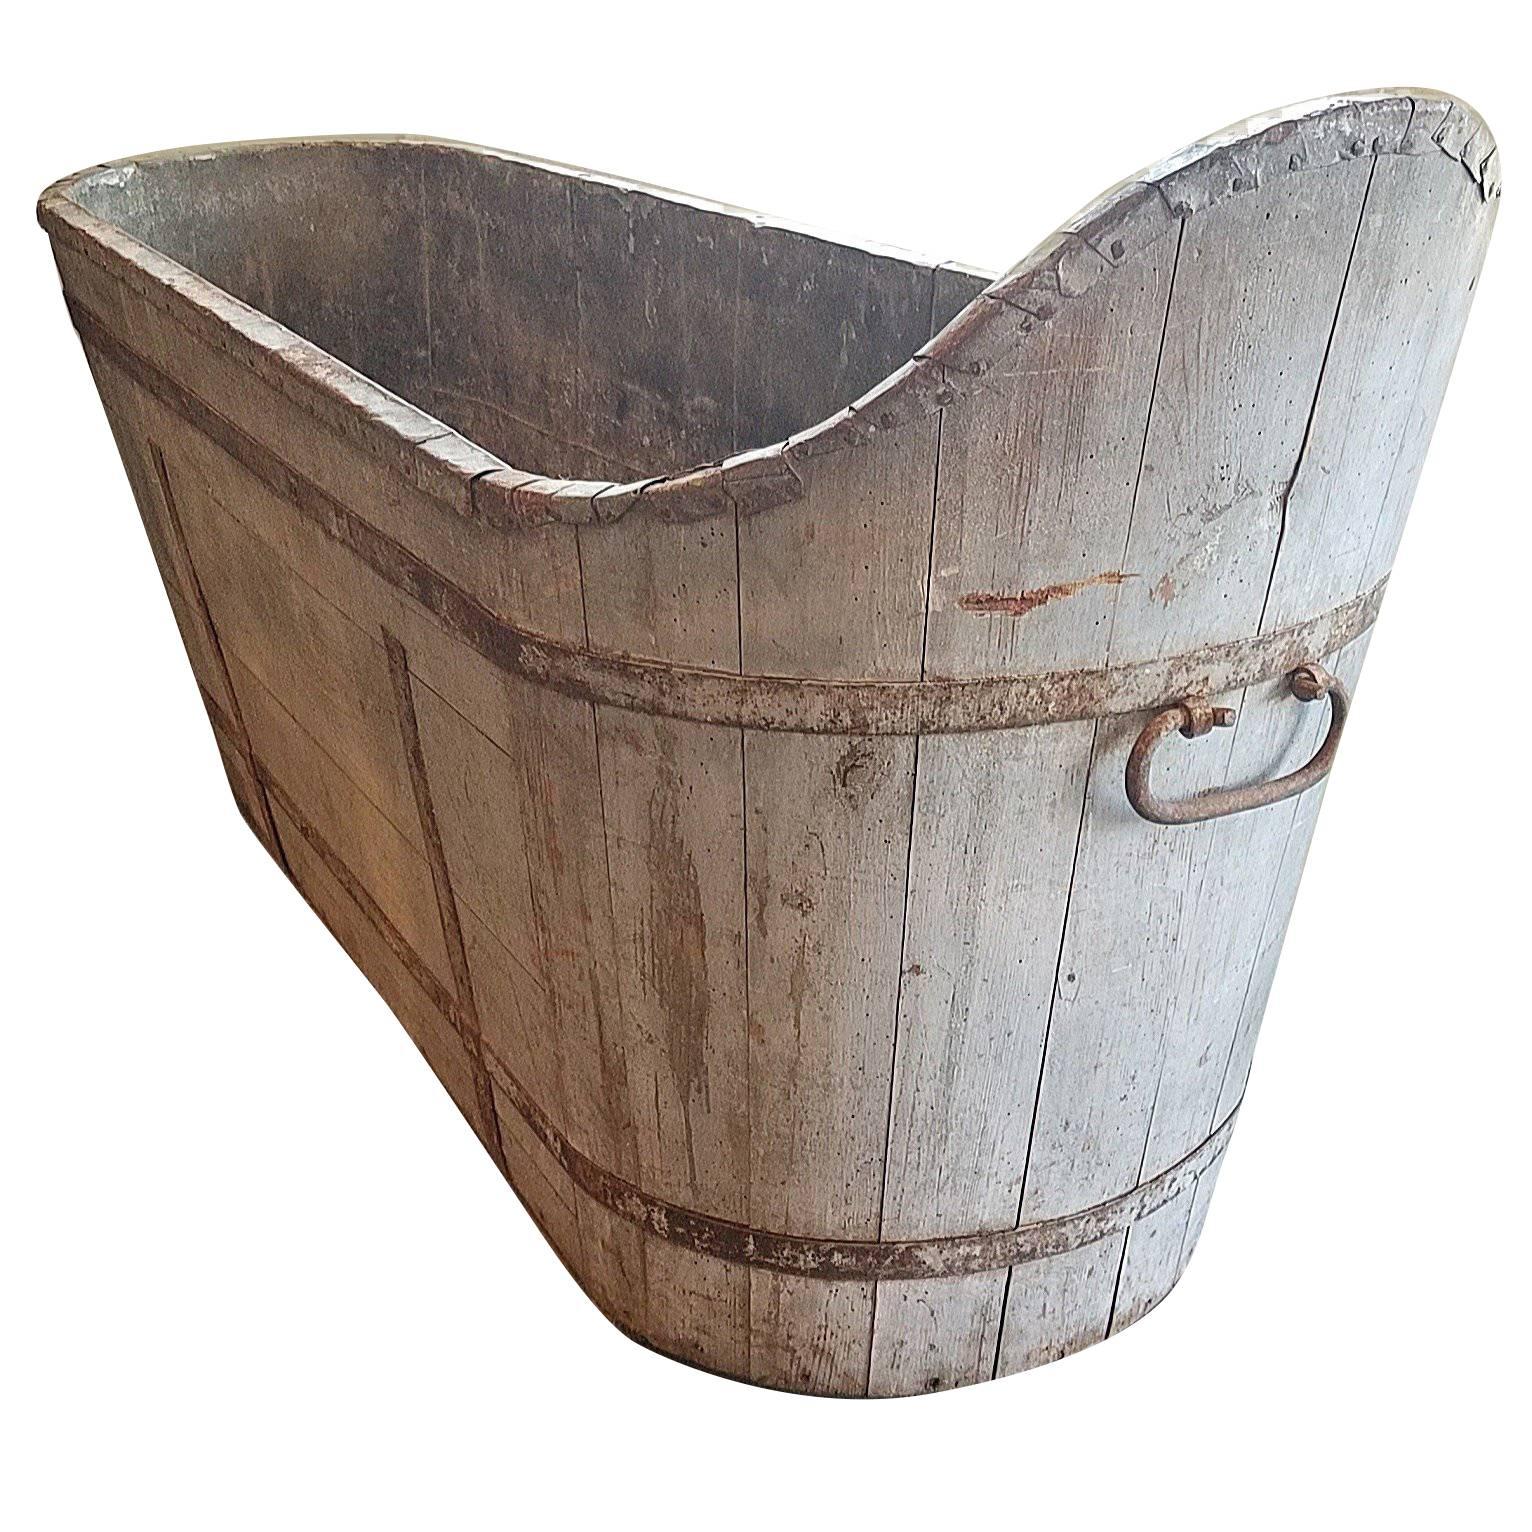 Antique French Wood Plank Tub with Metal Strap as Planter